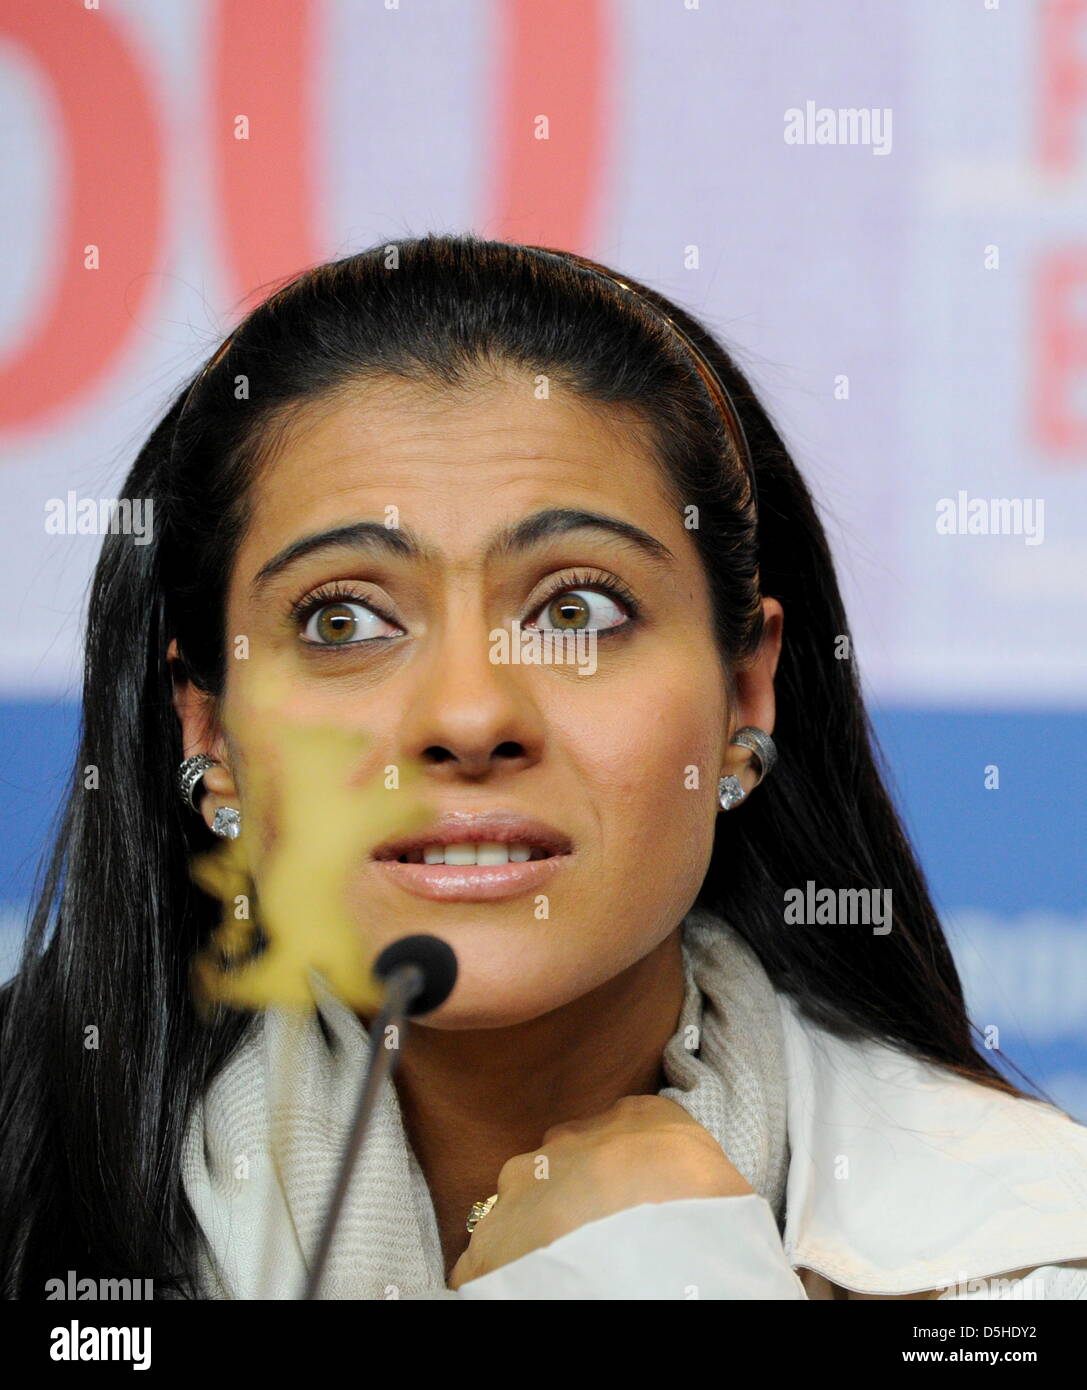 Indian actress Kajol Devgan attends the press conference for the film 'My name is Khan' running in competition during the 60th Berlinale International Film Festival in Berlin, Germany, Friday, 12 February 2010. Photo: Soeren Stache dpa/lbn Stock Photo